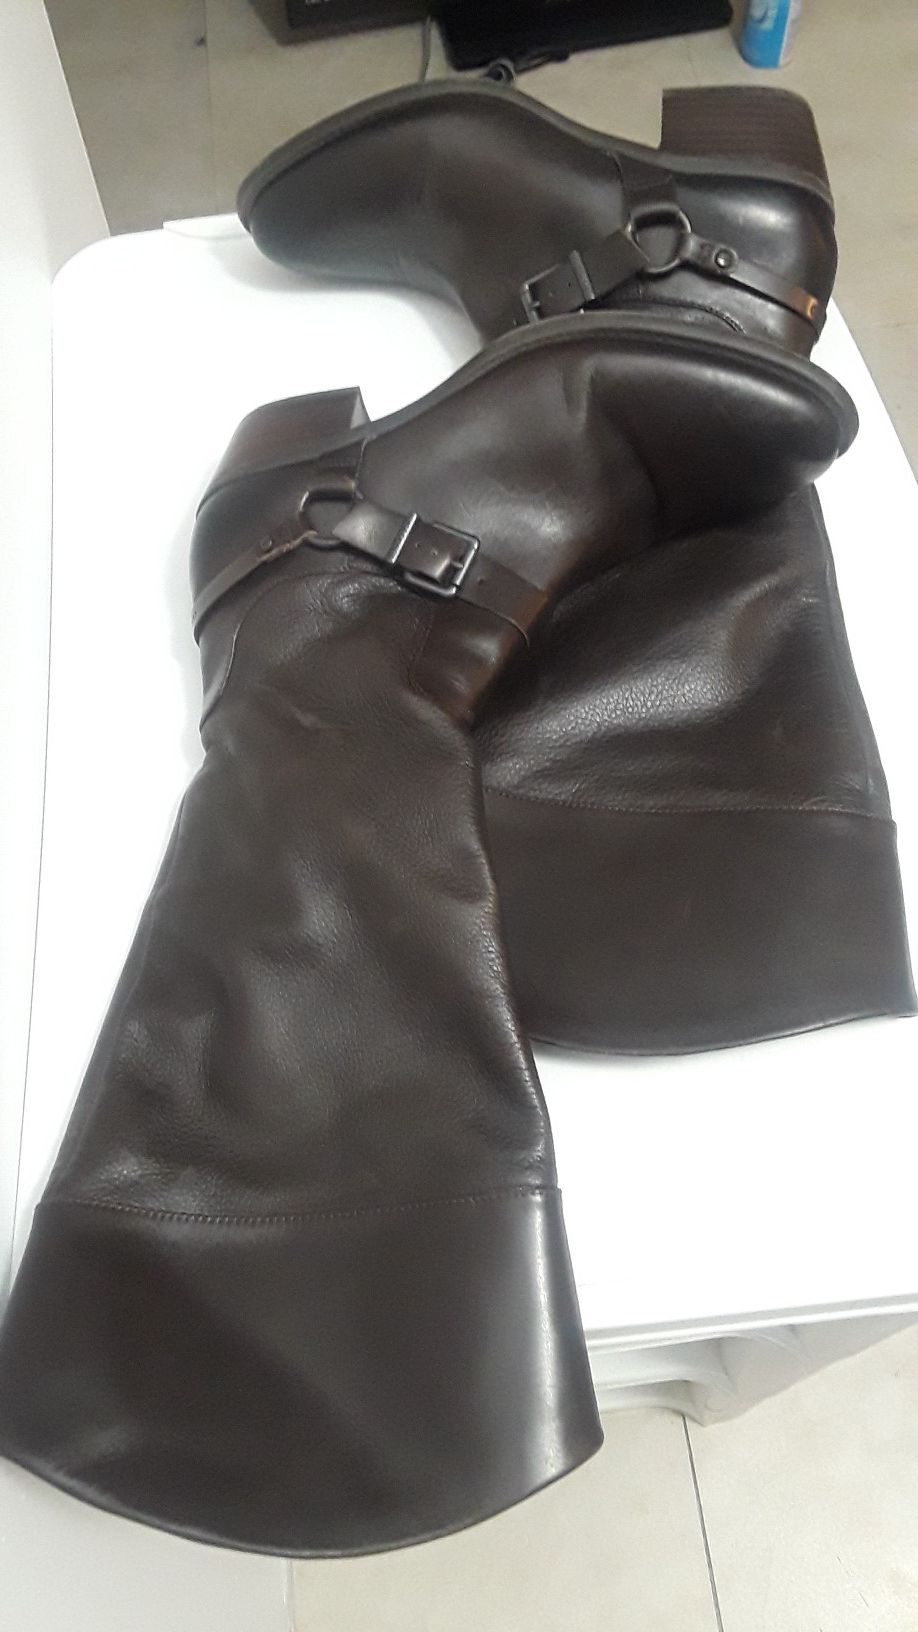 Vince Camuto chocolate ladies size 10 boots. Wore a few times. Great condition as you can see. Normally